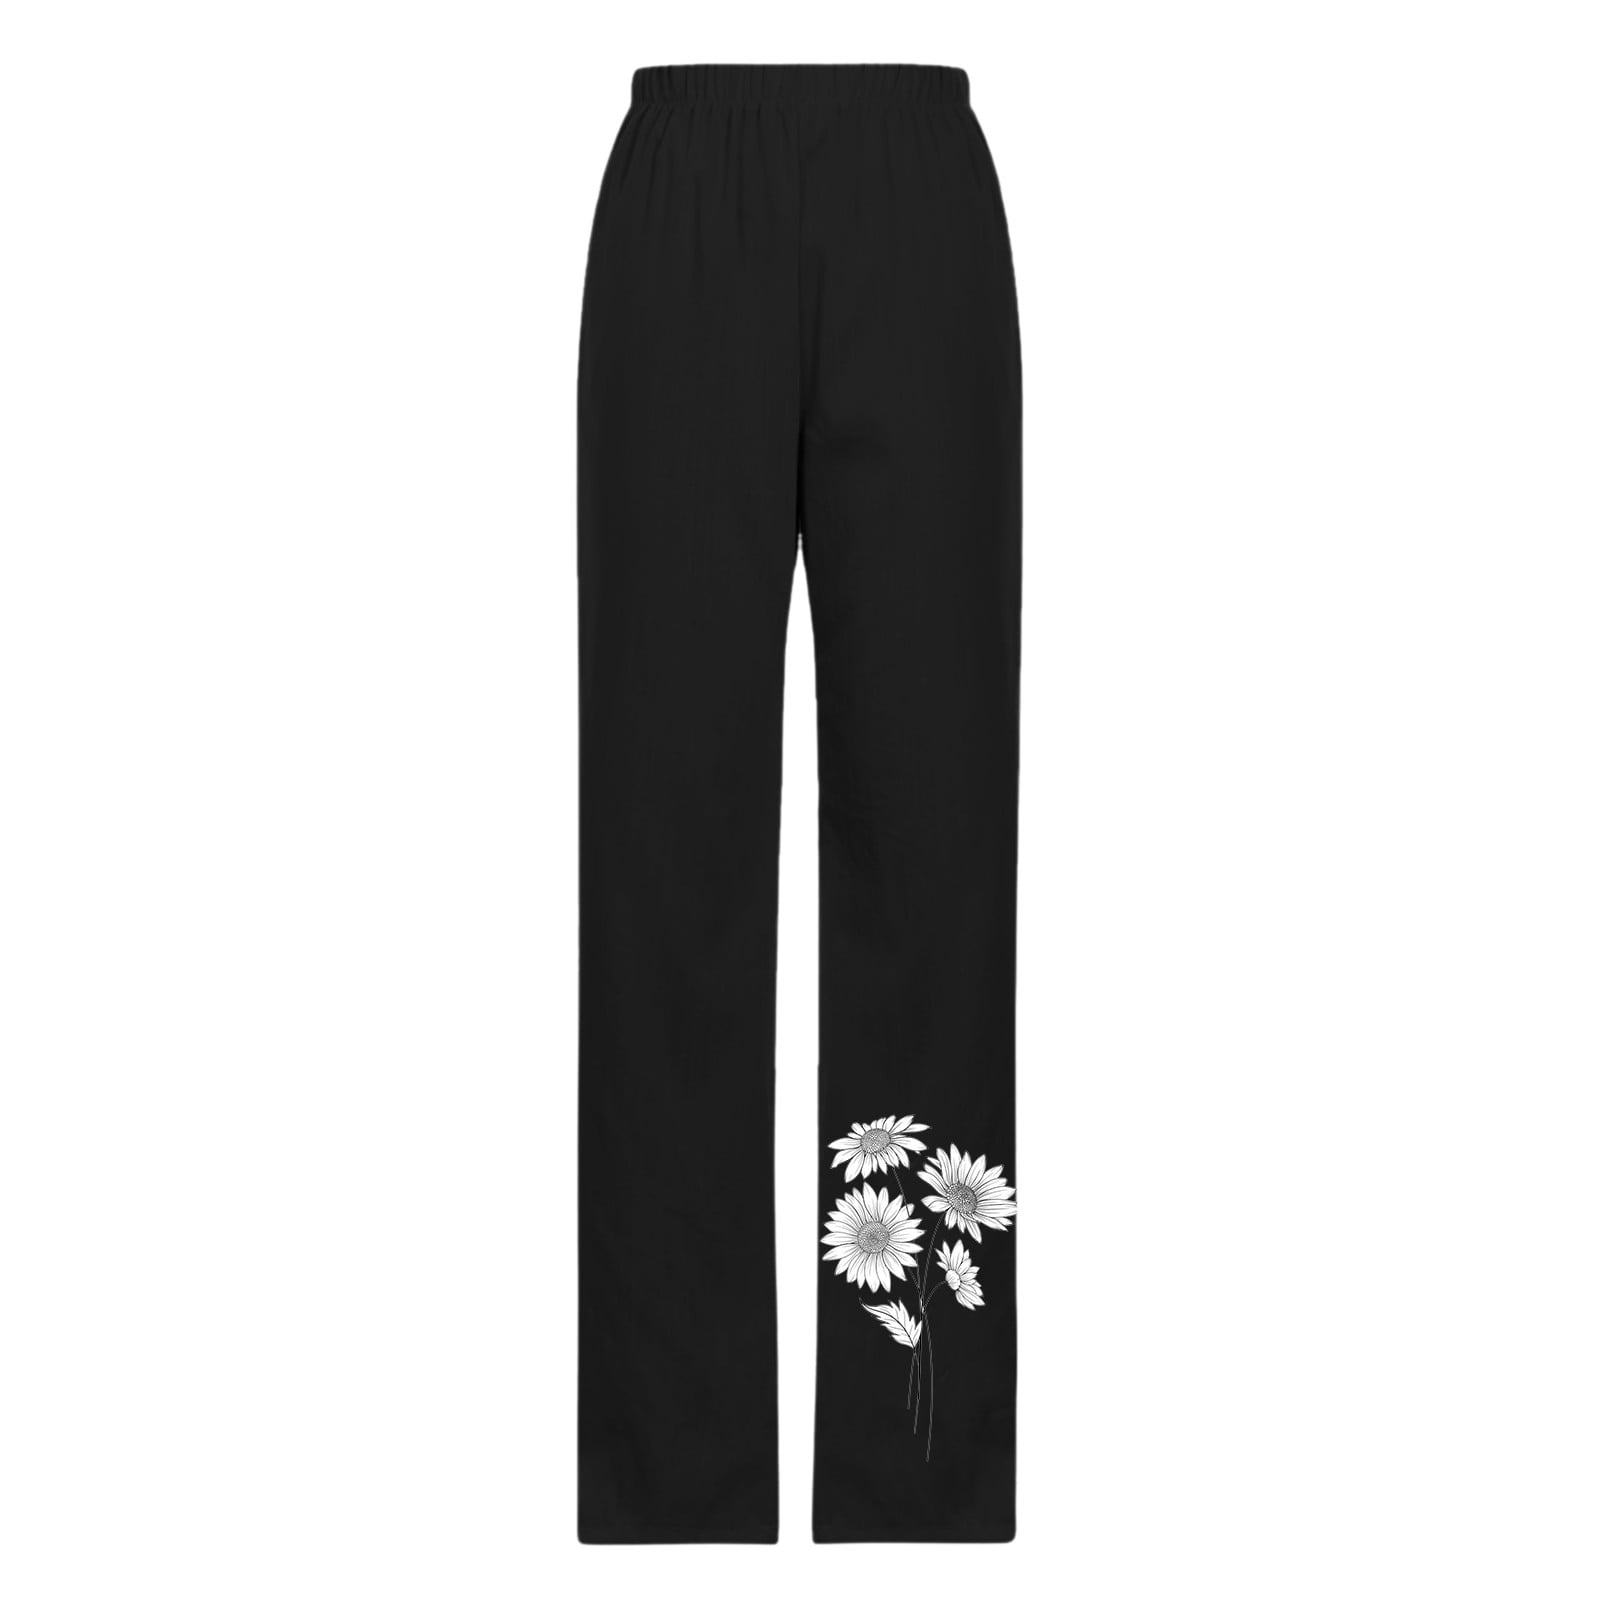 Moonker Cropped Pants For Women Office Women Capri Pants With Pockets Wide  Leg Casual Soft Pant Lightweight Capris 